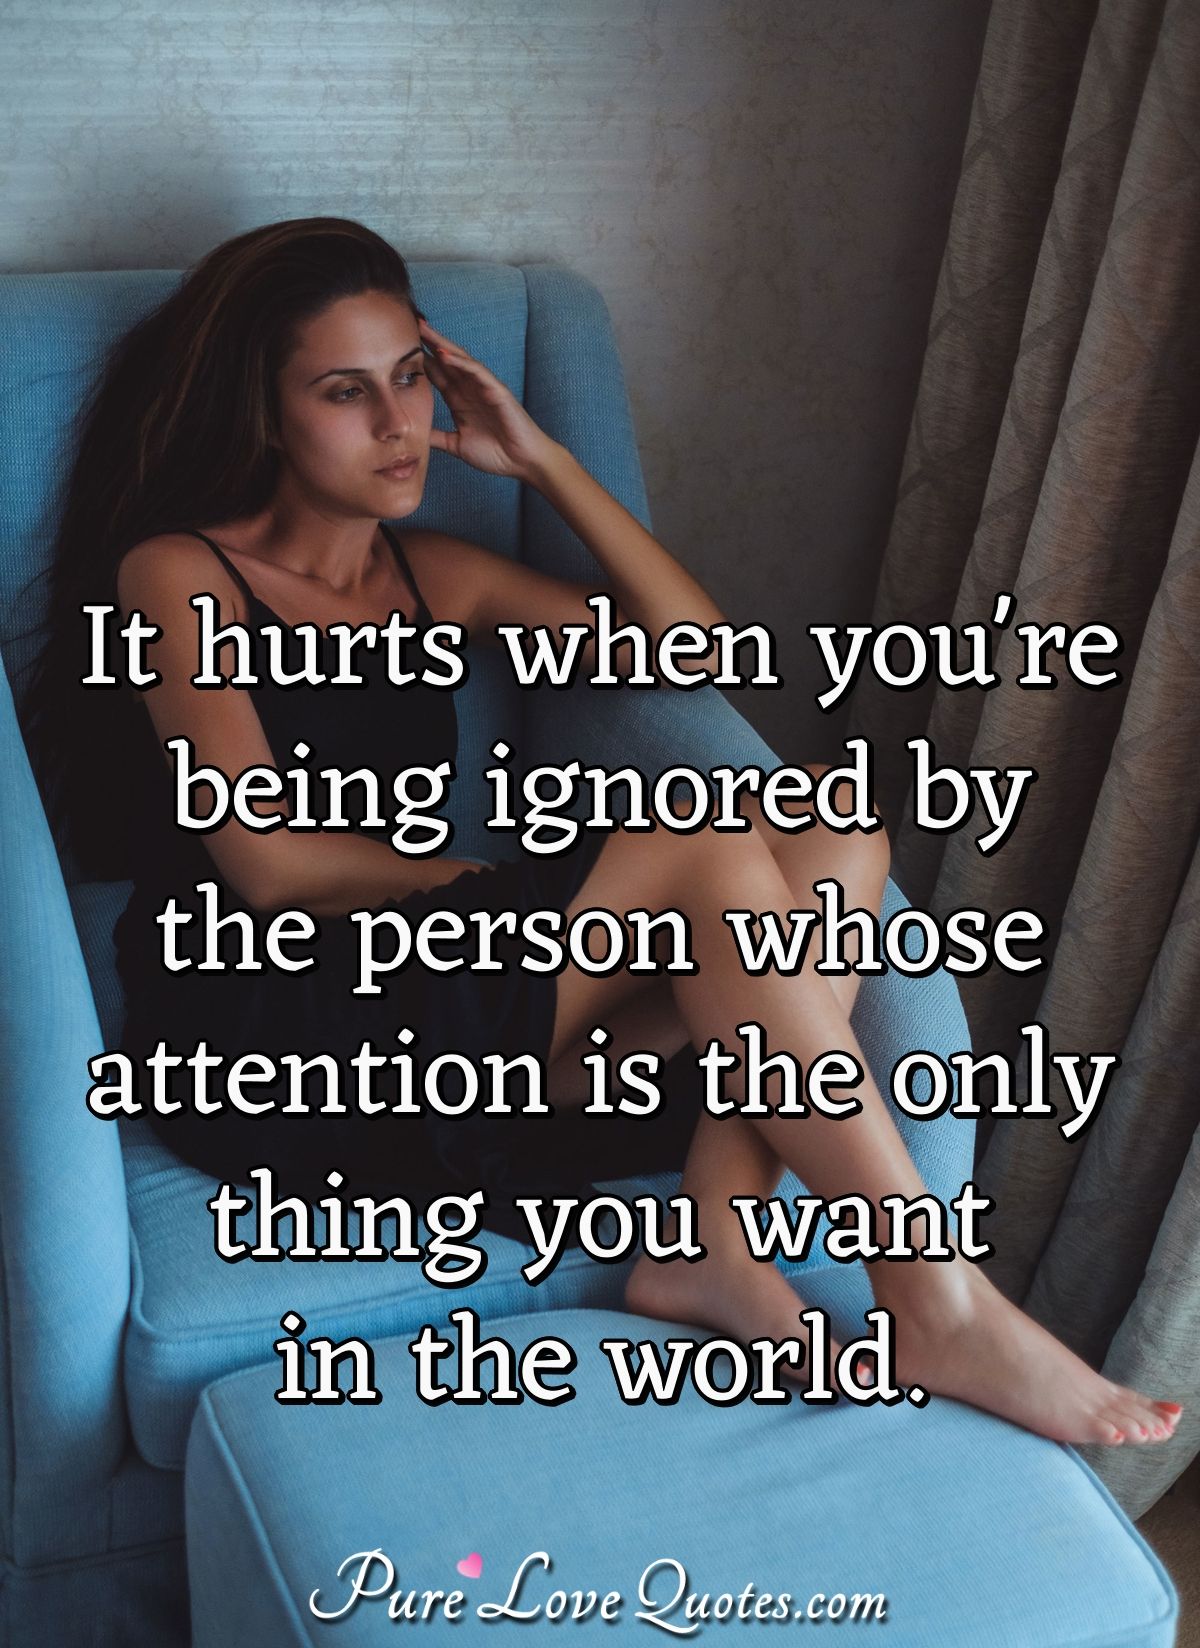 It hurts when you're being ignored by the person whose attention is the only thing you want in the world. - Anonymous